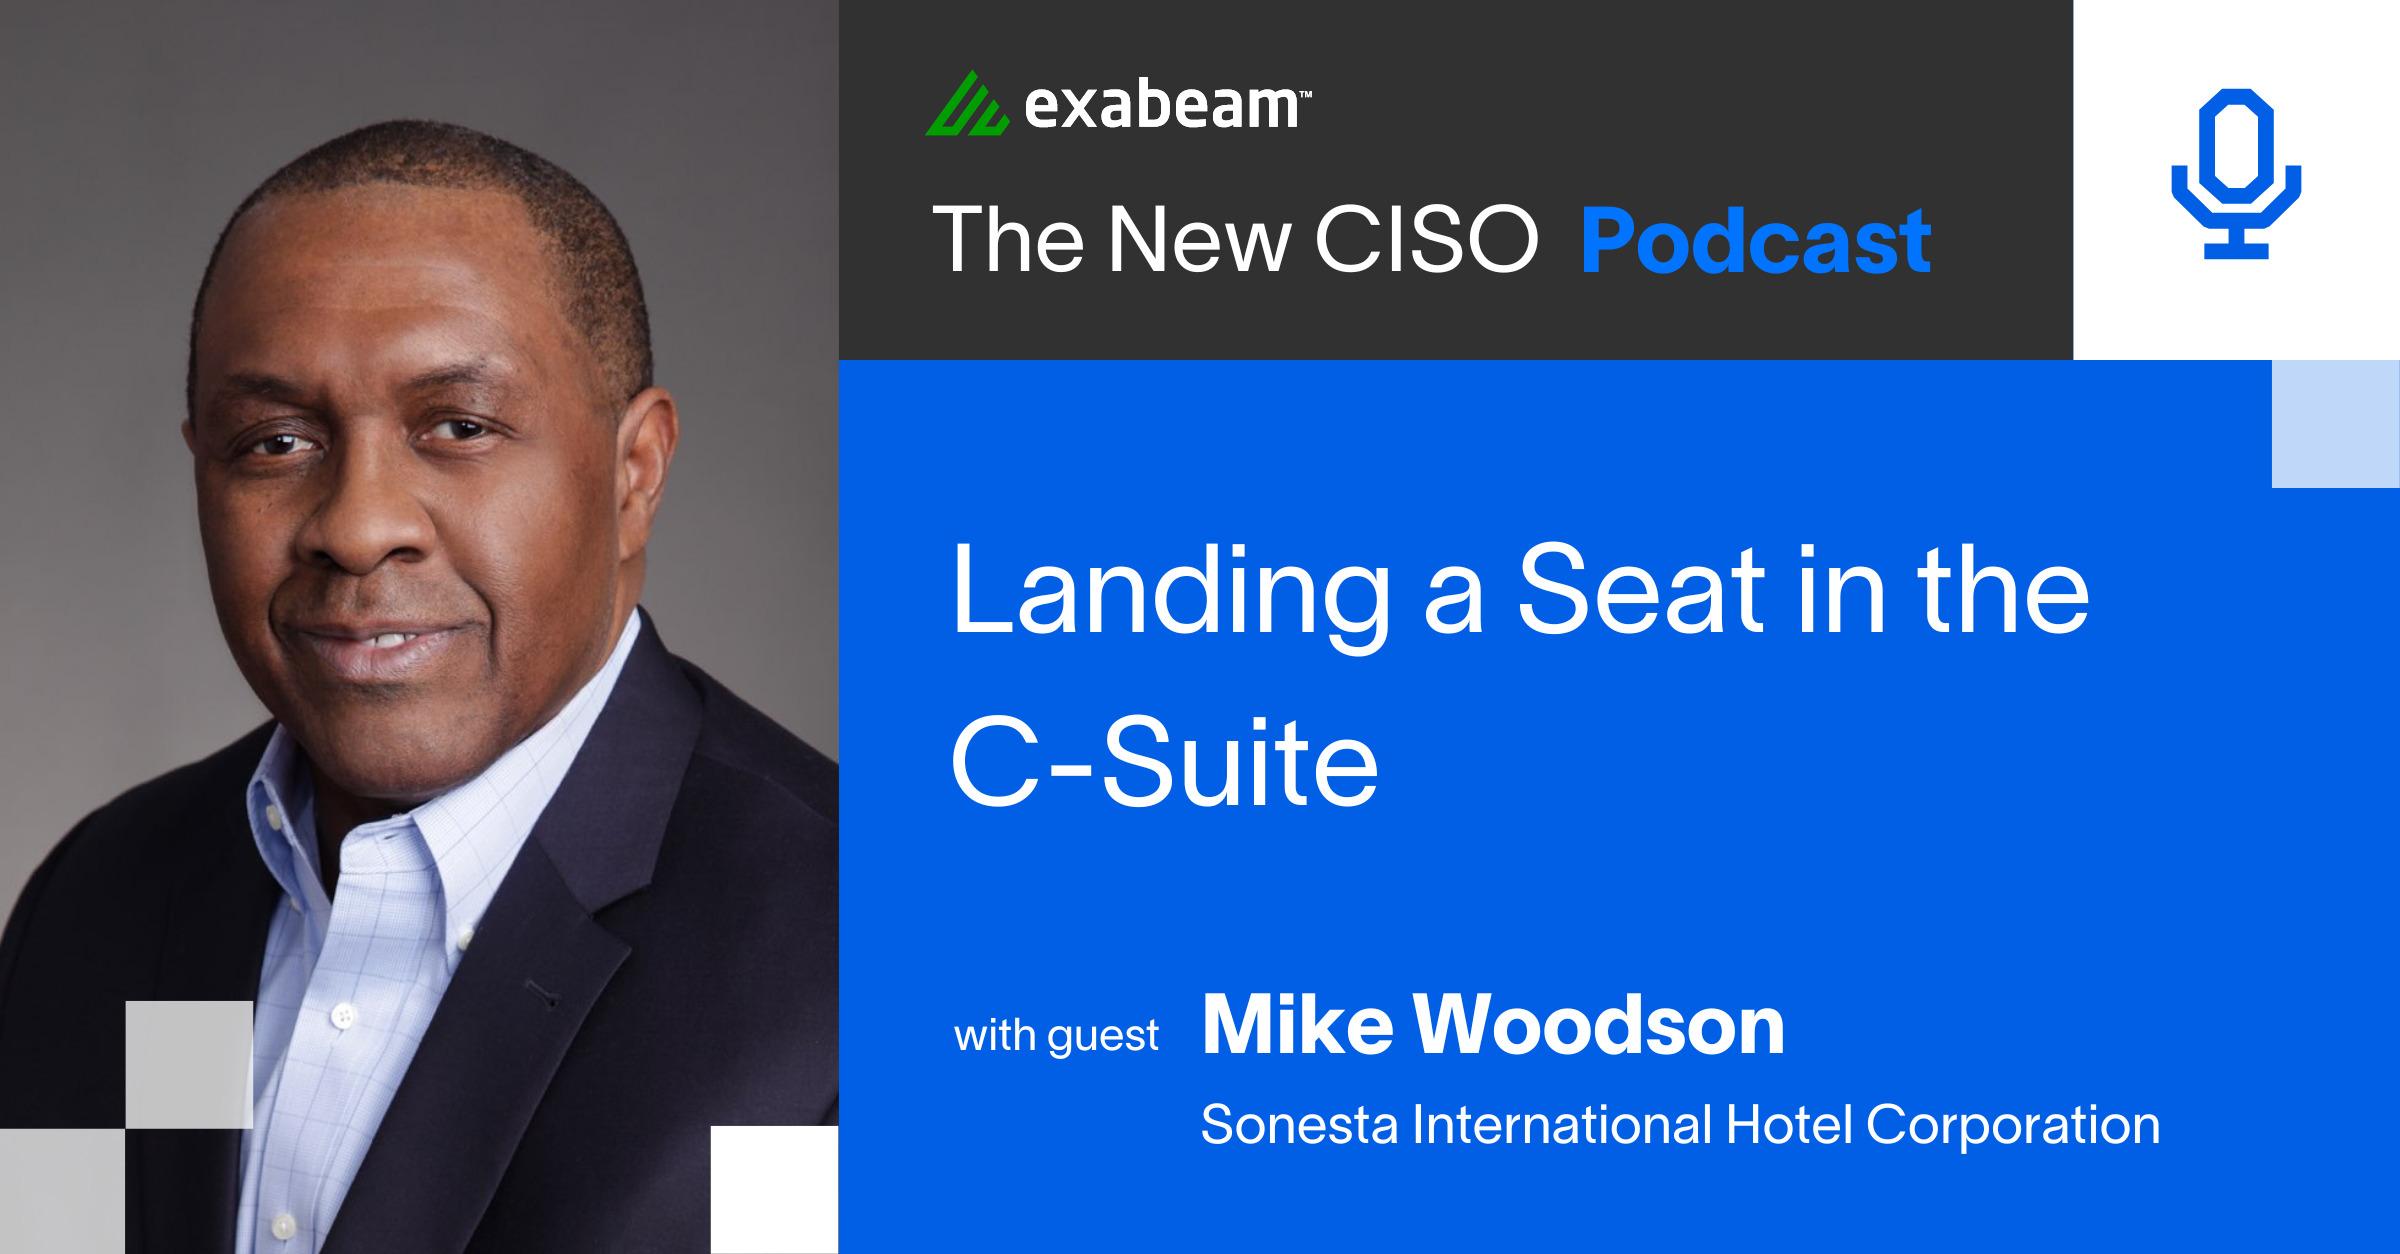 The New CISO Podcast Episode 72: “Landing a Seat in the C-Suite” with Mike Woodson